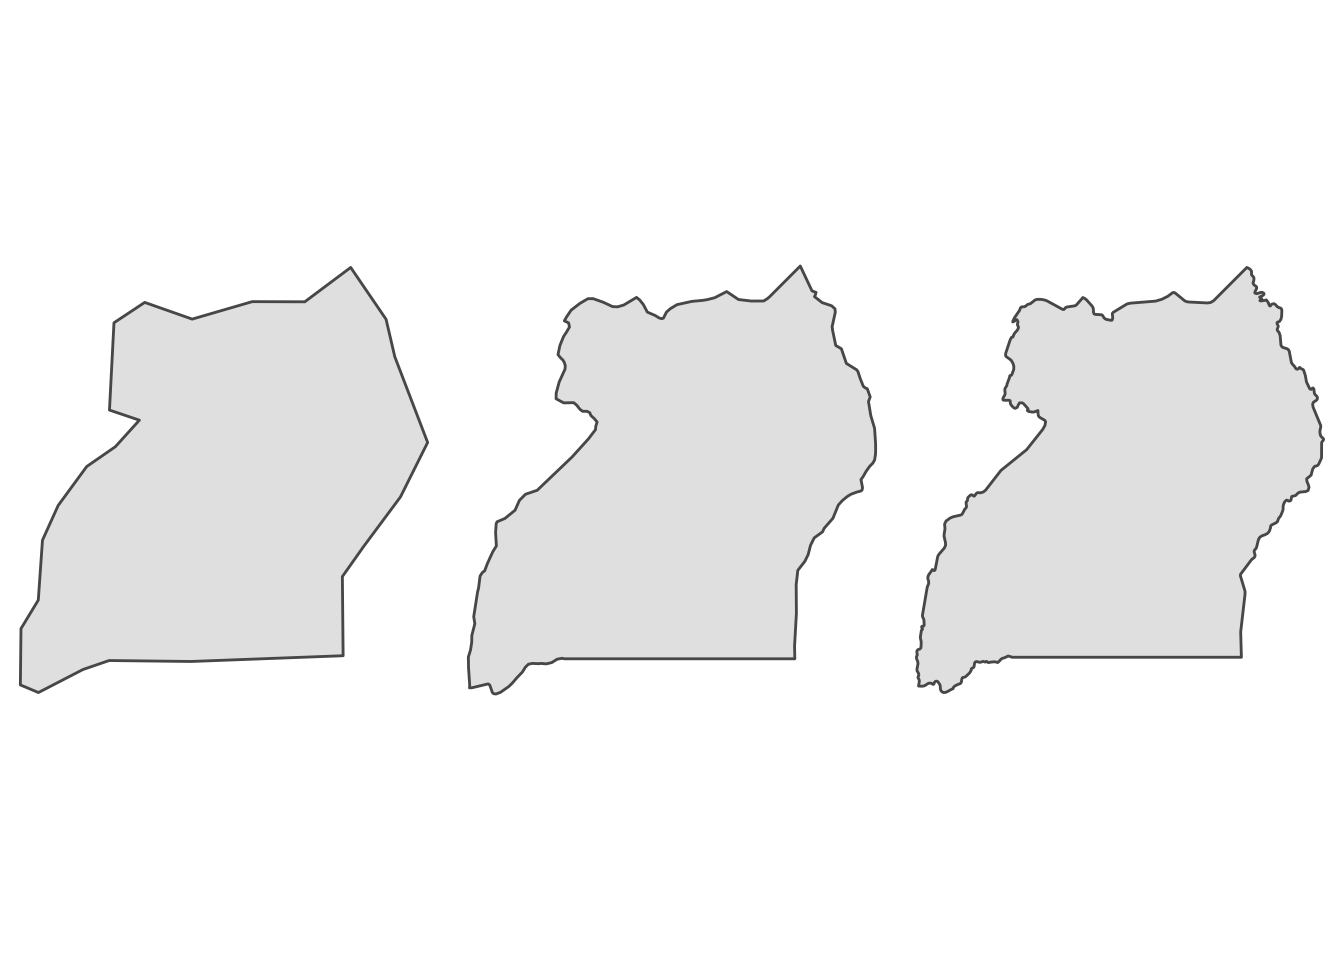 Three side by side grey maps of Uganda. The borders of the first map looks very polygonal, while the detail increases in each successive map.